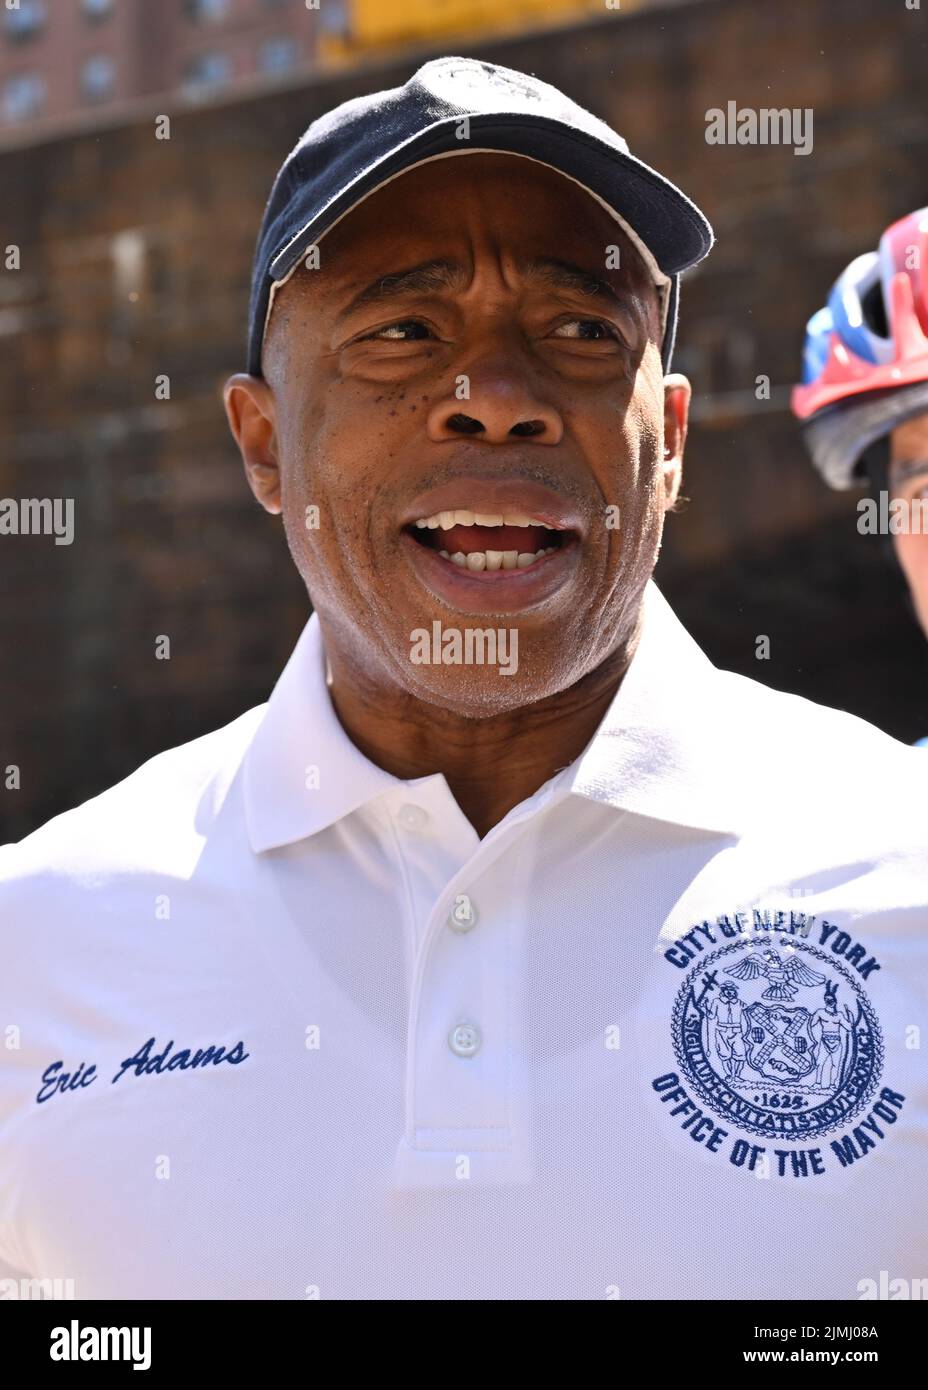 Mayor Eric Adams rides a Citibike as he participates in the Summer Streets event on August 6, 2022 in New York. Summer Streets is an annual initiative Stock Photo